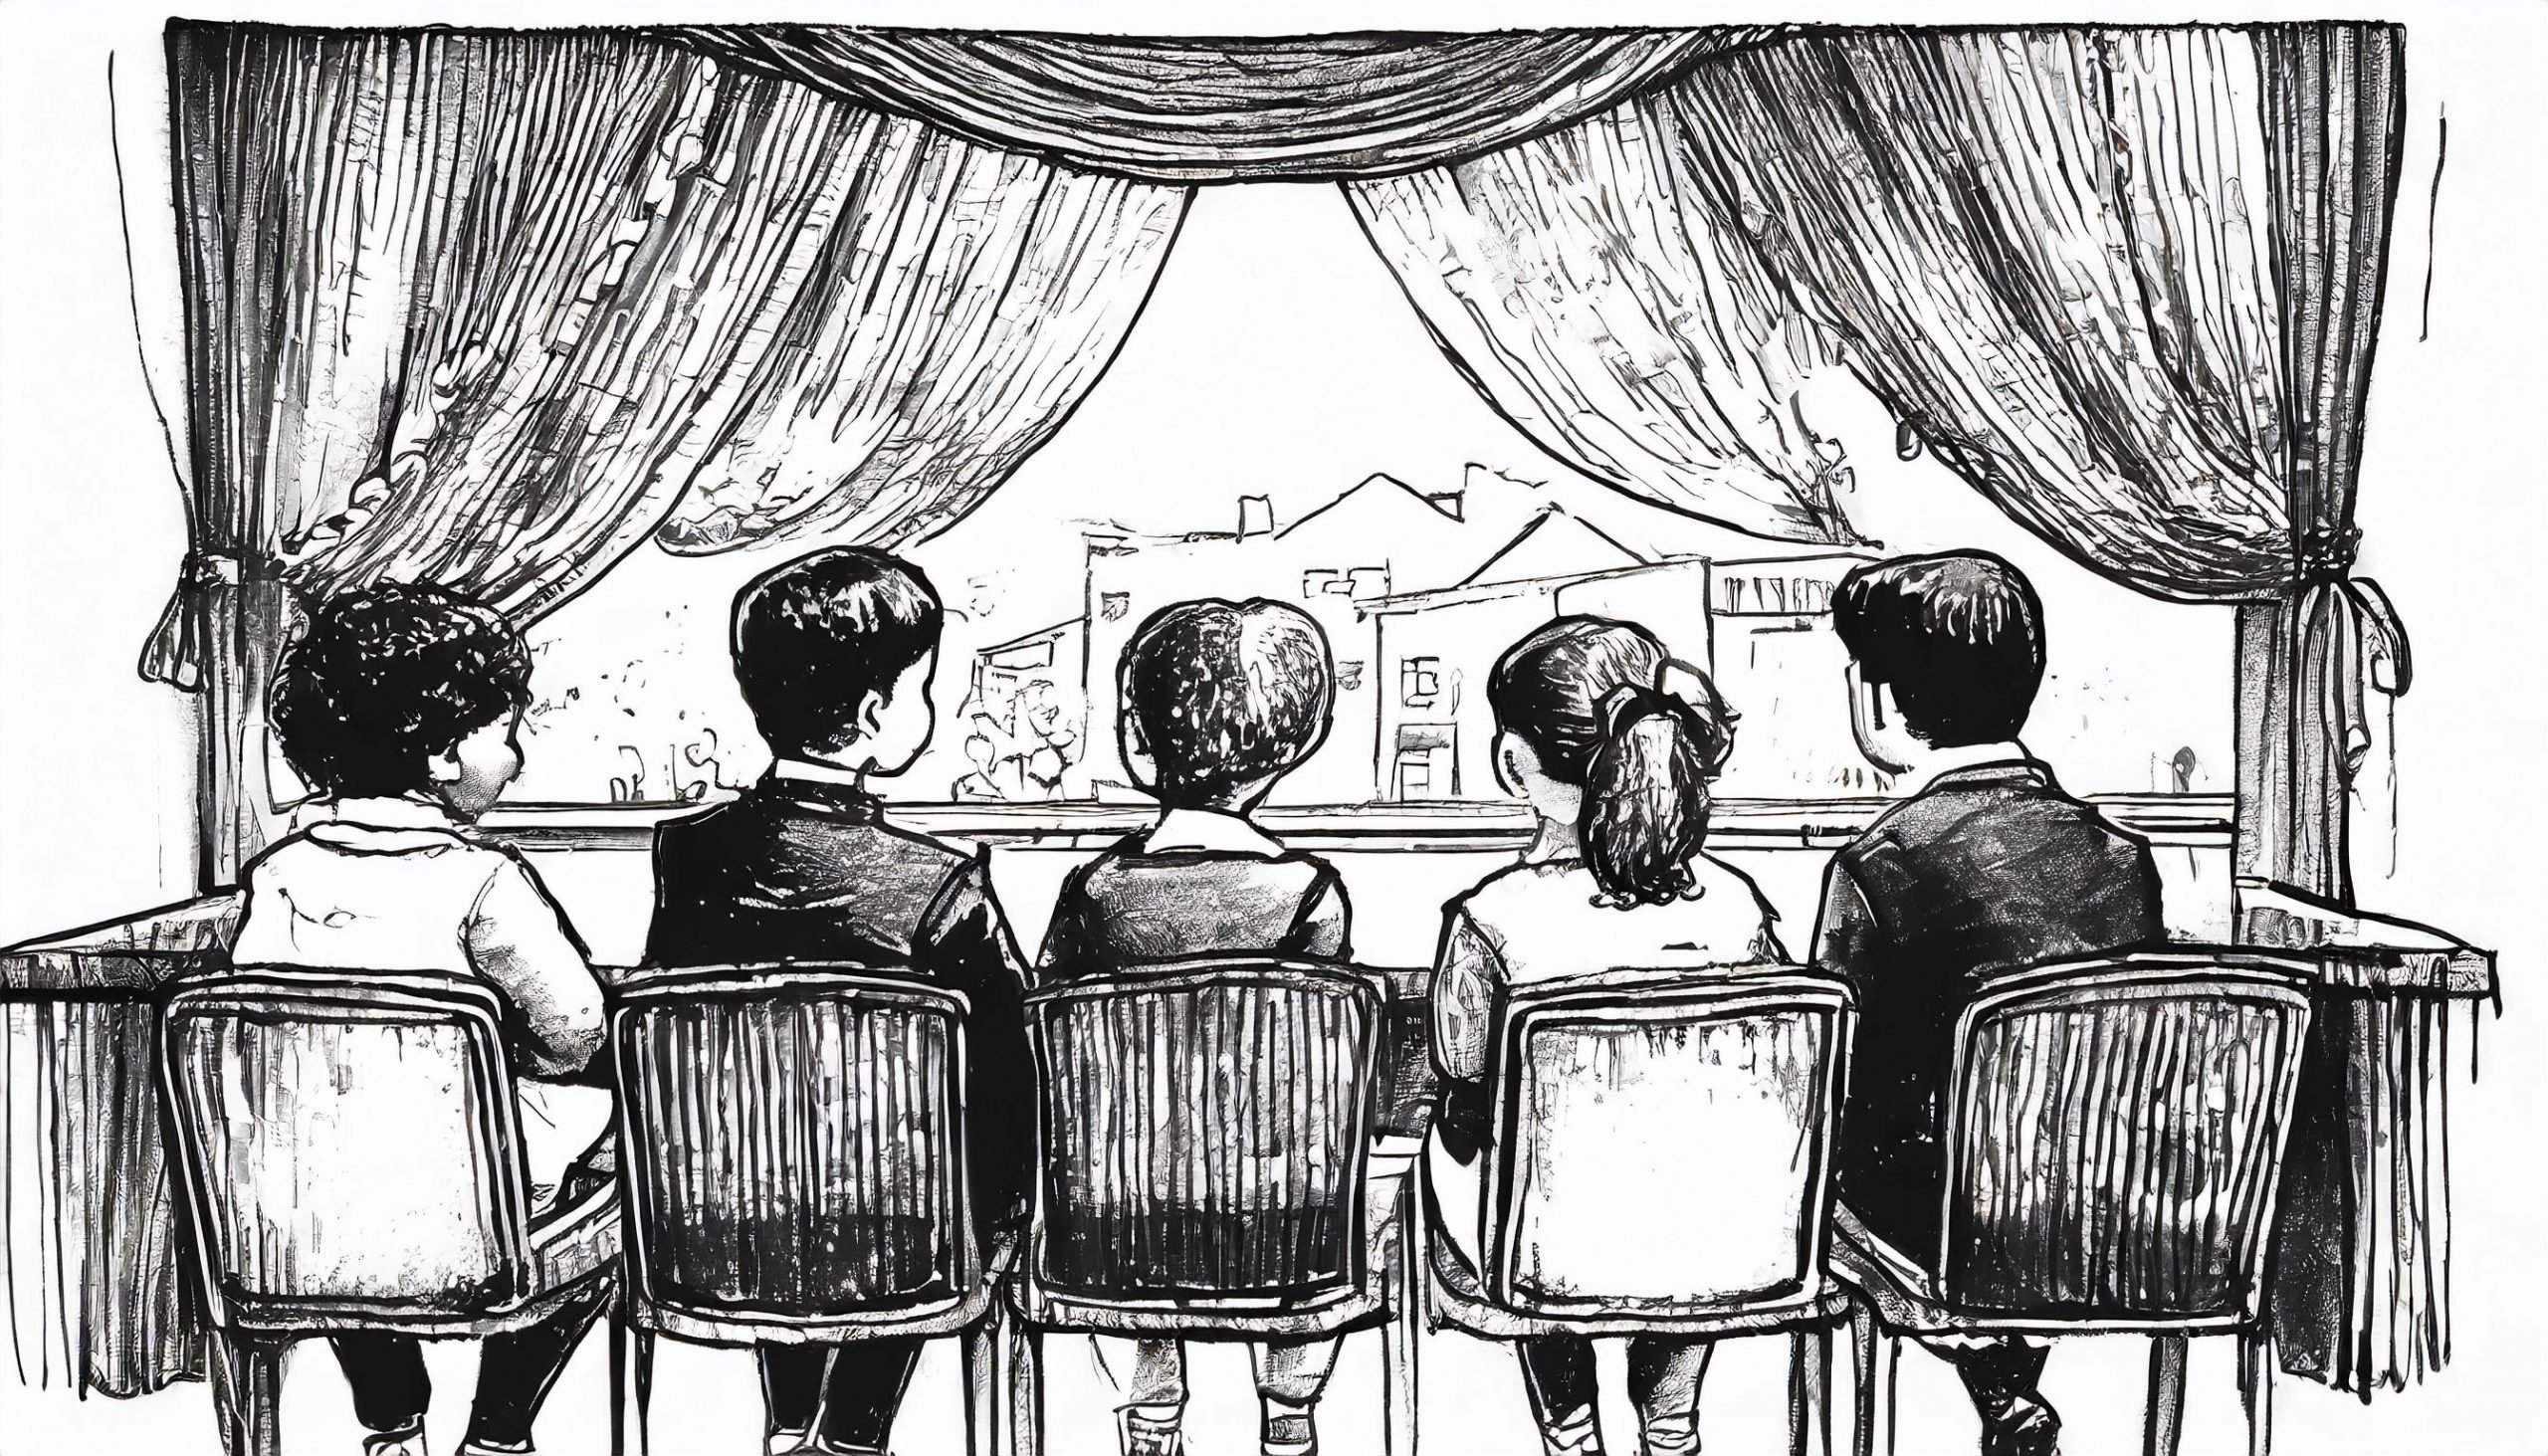 Sketch in black and white, late thirties of the twentieth century, European children sitting in a small cinema hall in a village